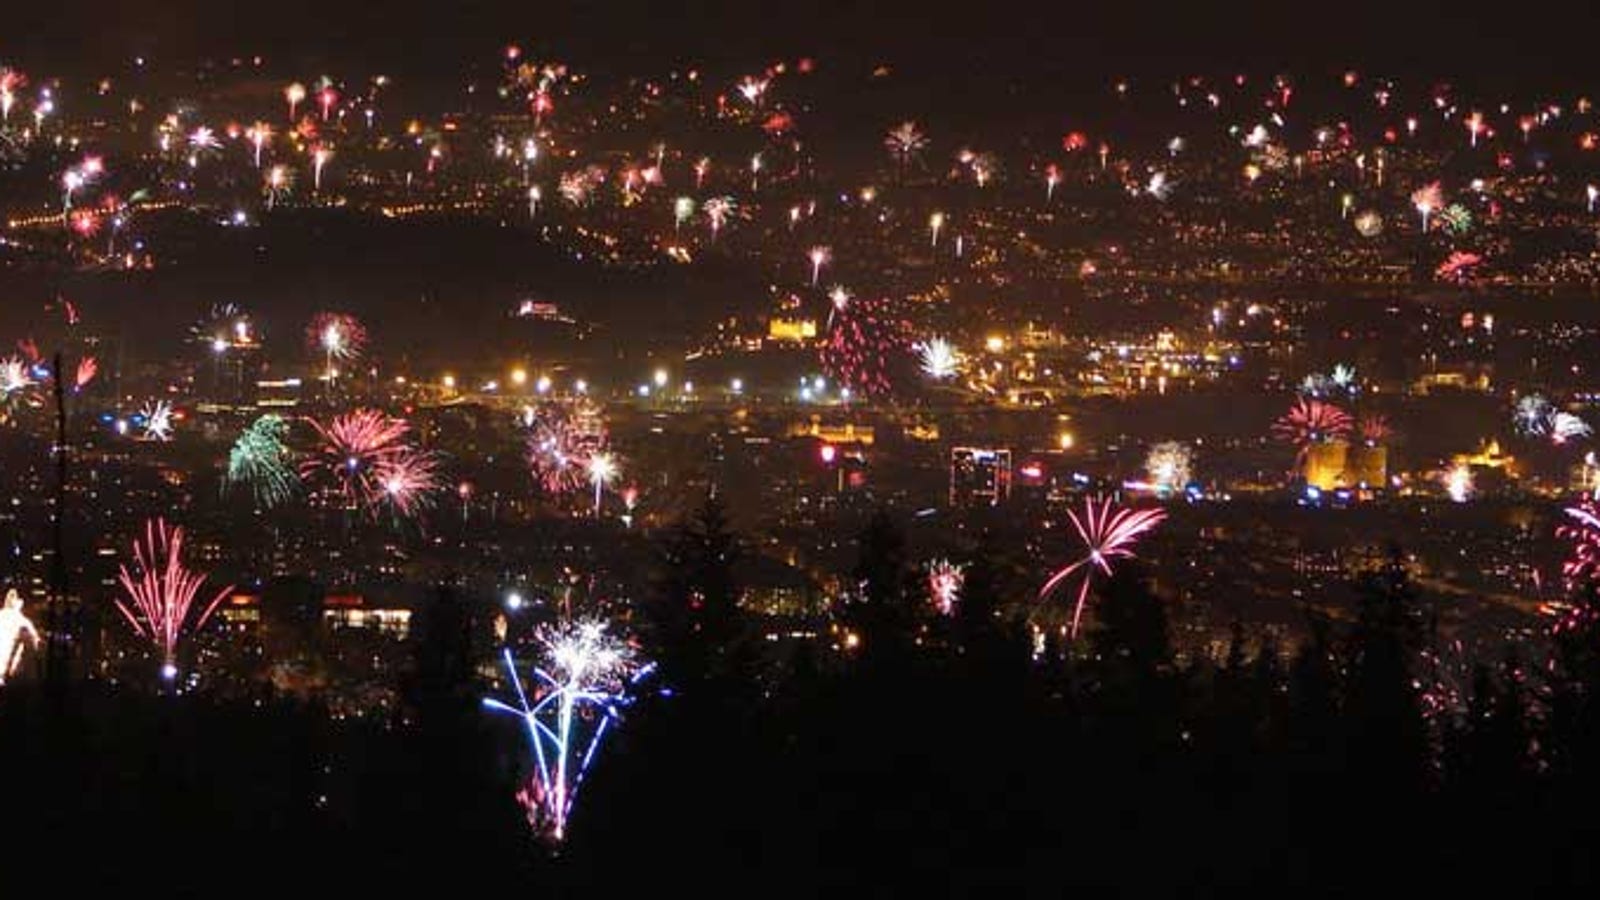 Oslo Celebrated New Year's Eve with More Fireworks Than You